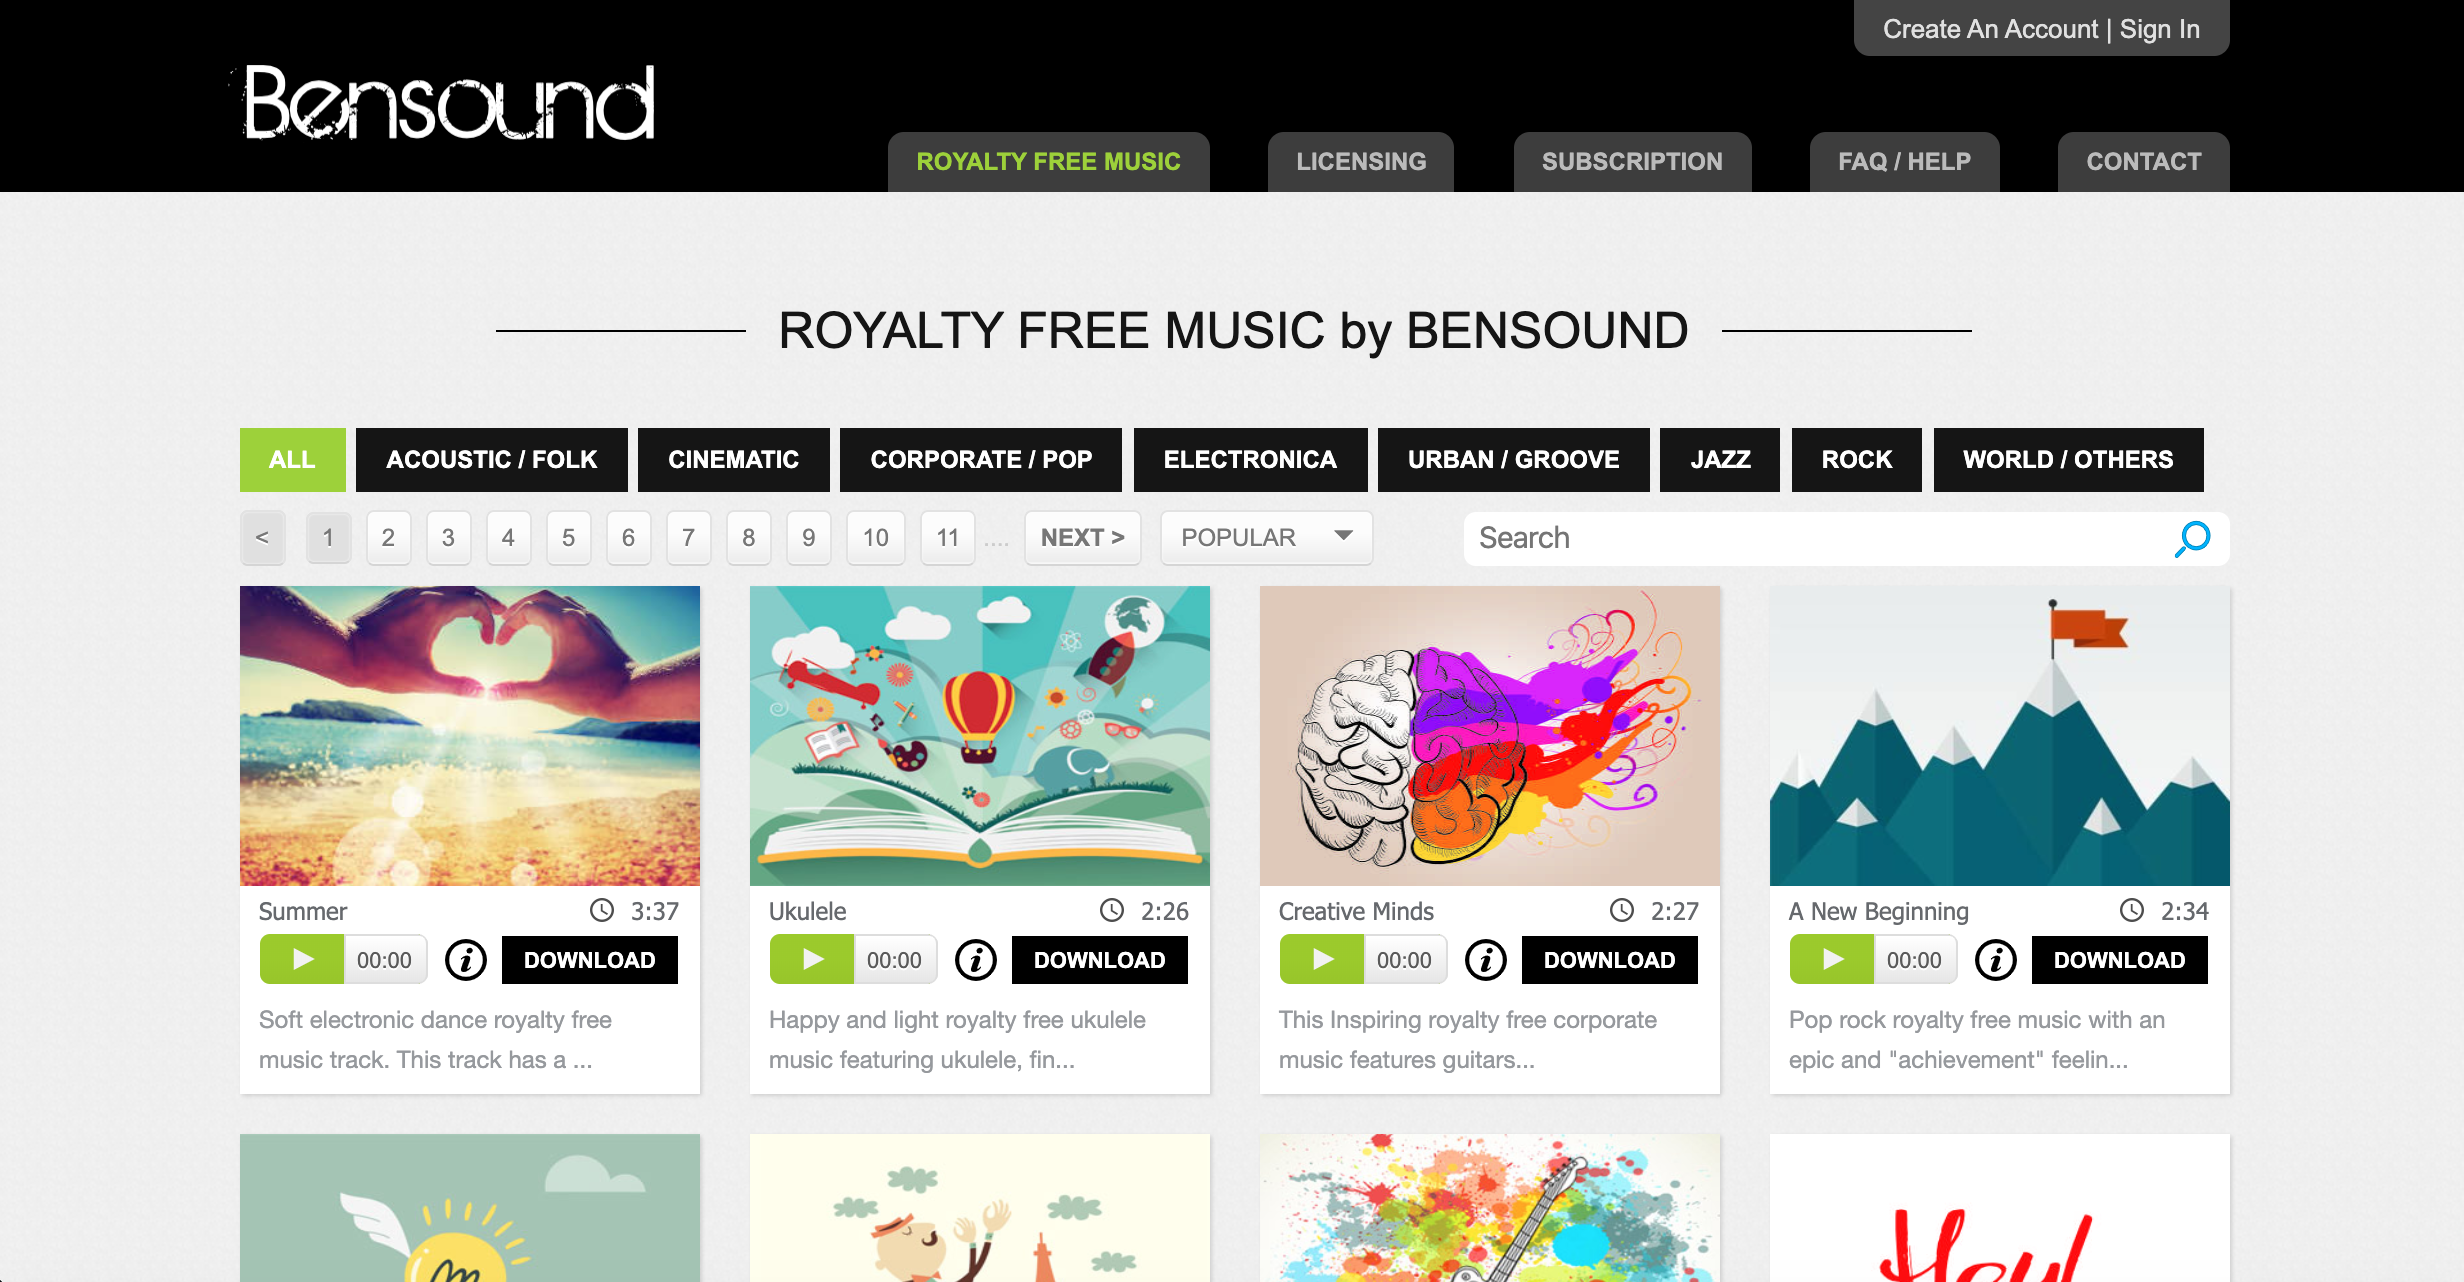 Royalty Free Music homepage for Bensound